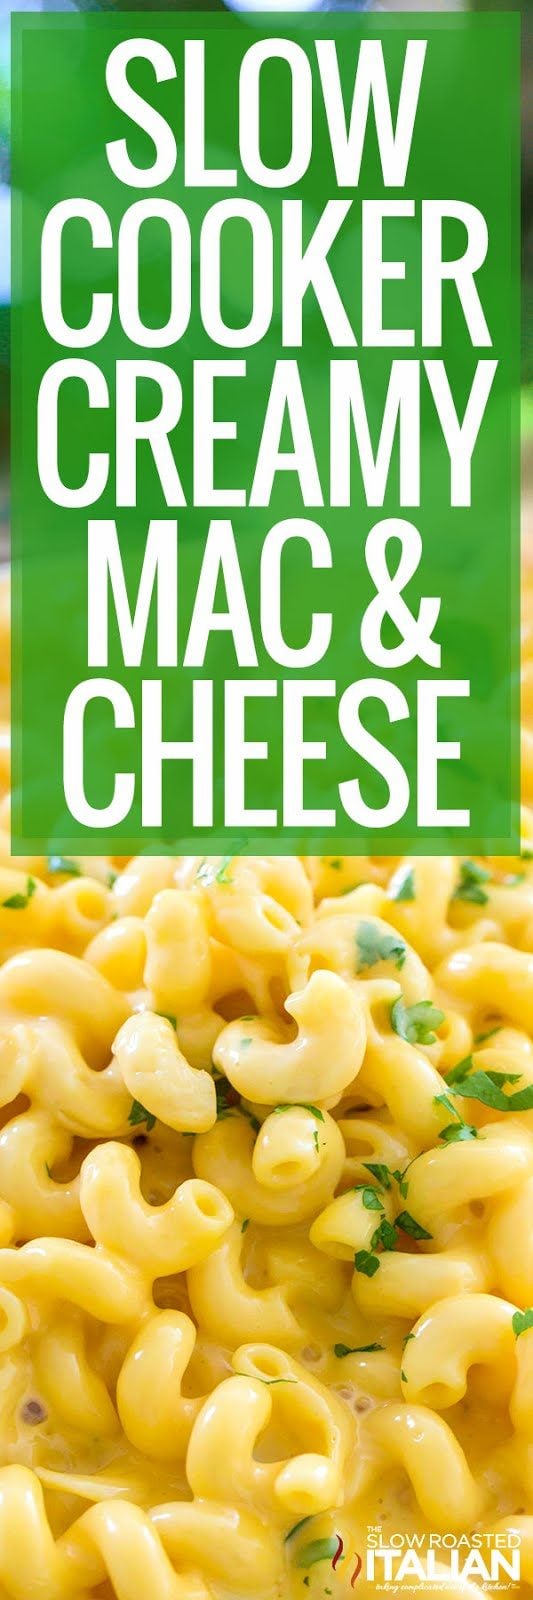 slow-cooker-creamy-mac-and-cheese-pin-4505731